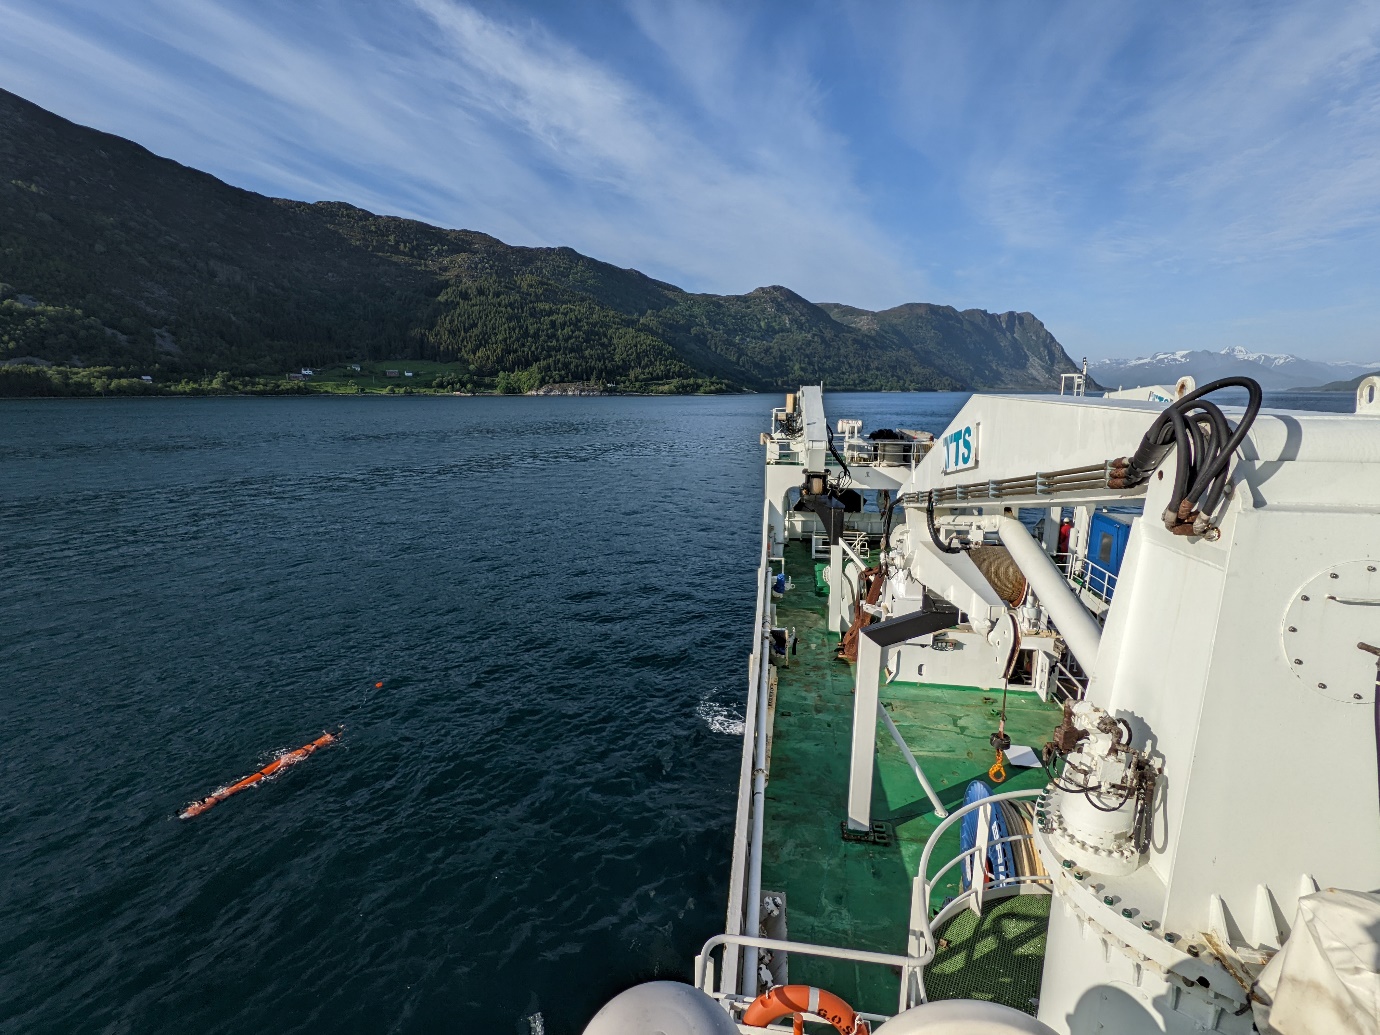 Photo taken from high on the ship showing the rear of the ship, the AUV in the water and the terrain of Rovdefjorden